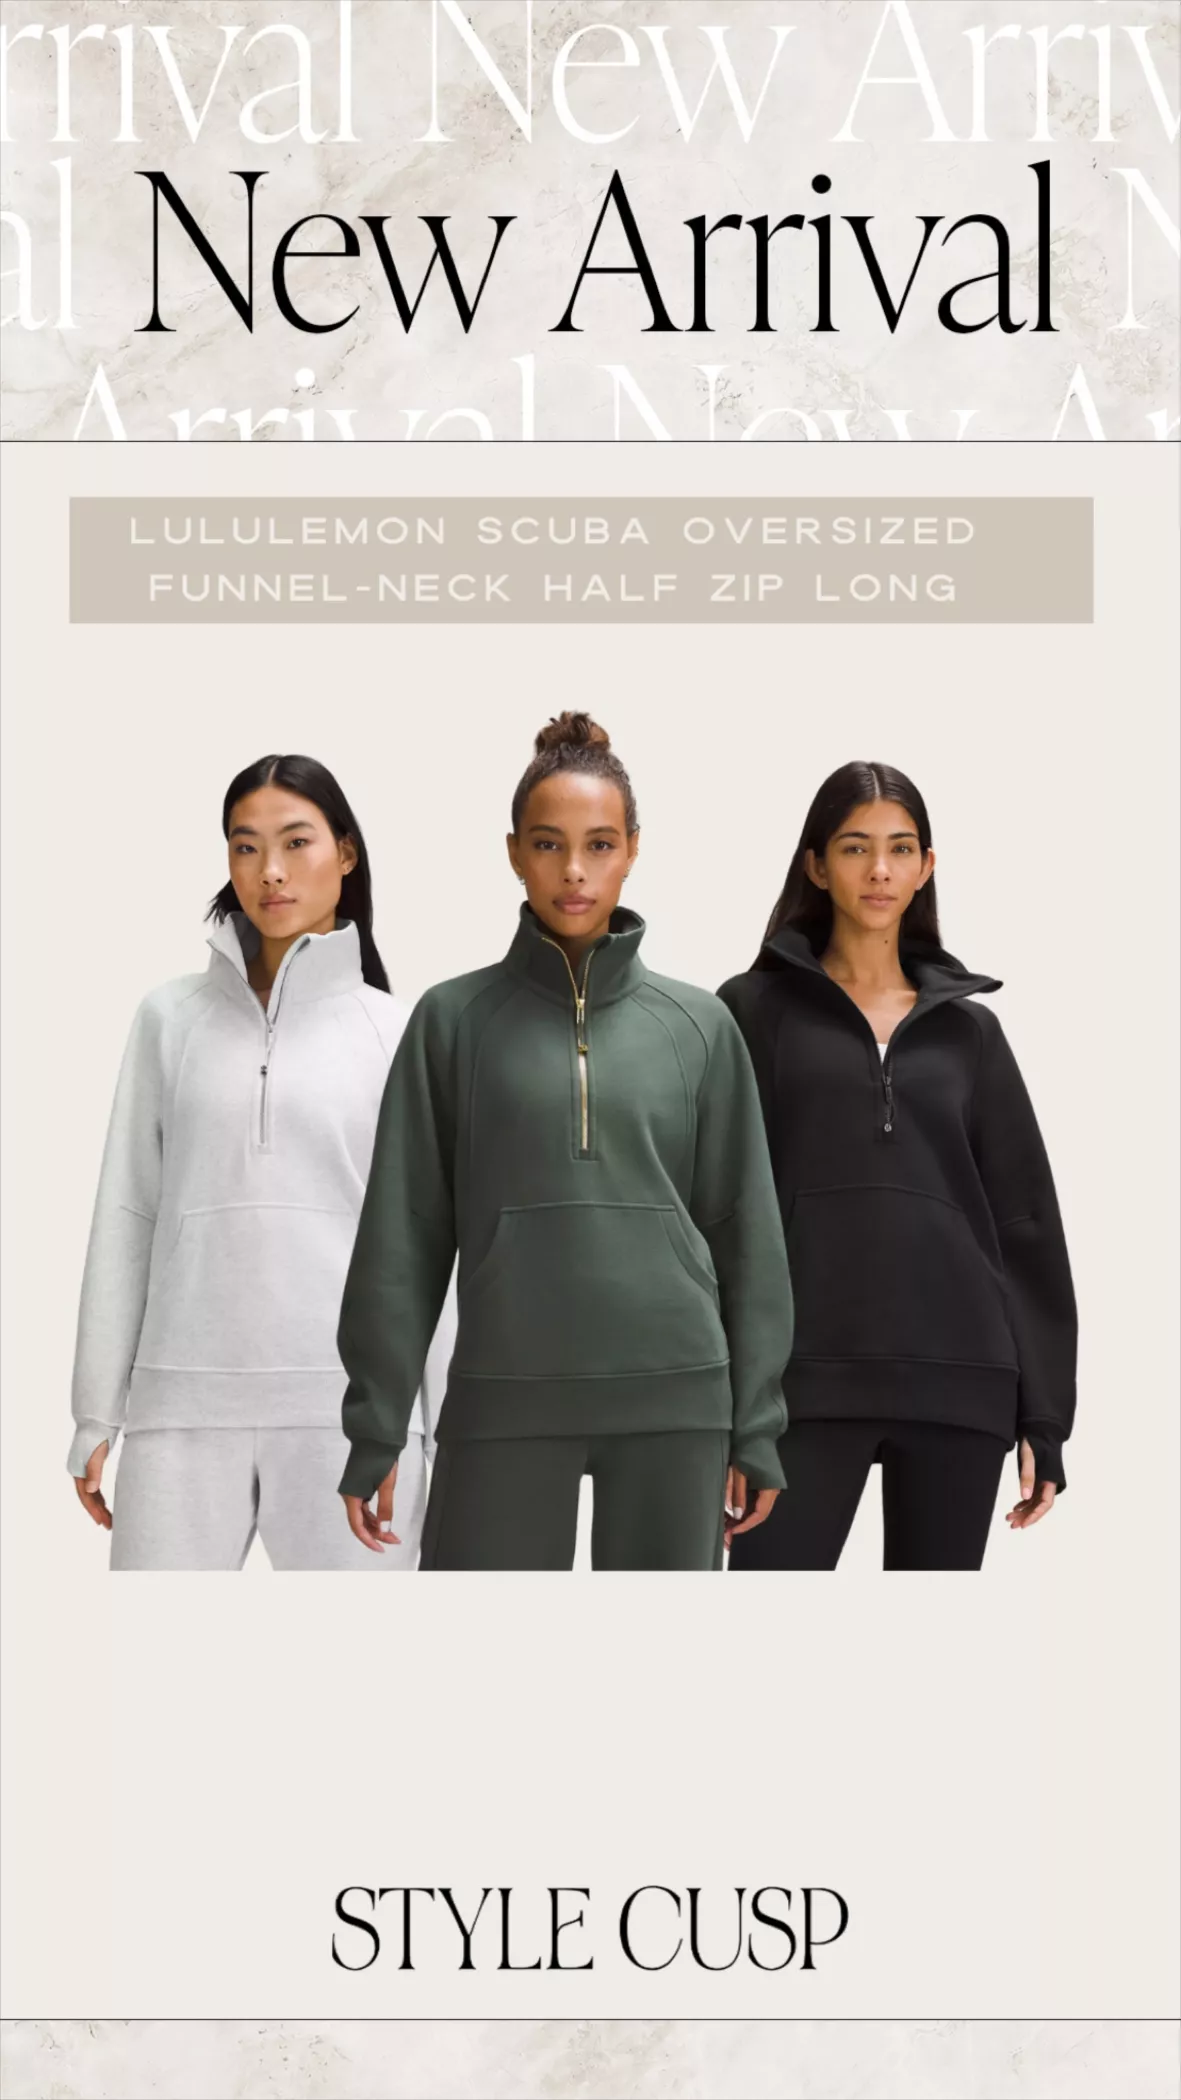 Scuba oversized half zip now have gold zippers in all colors. : r